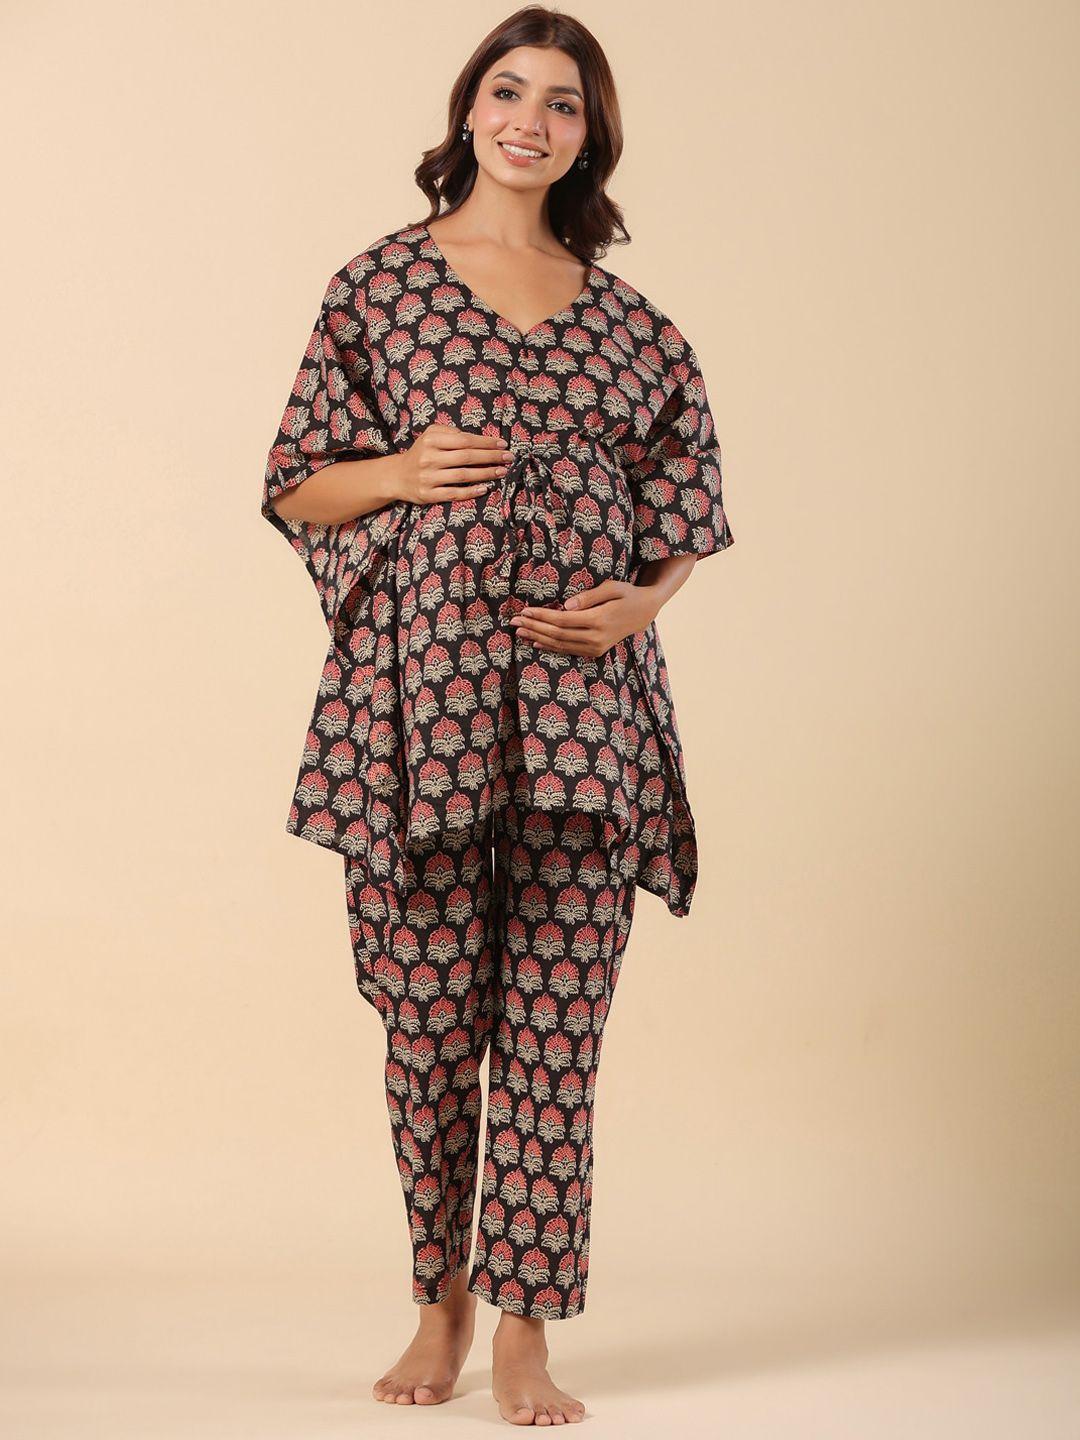 ikk kudi by seerat floral printed v-neck pure cotton maternity night suit